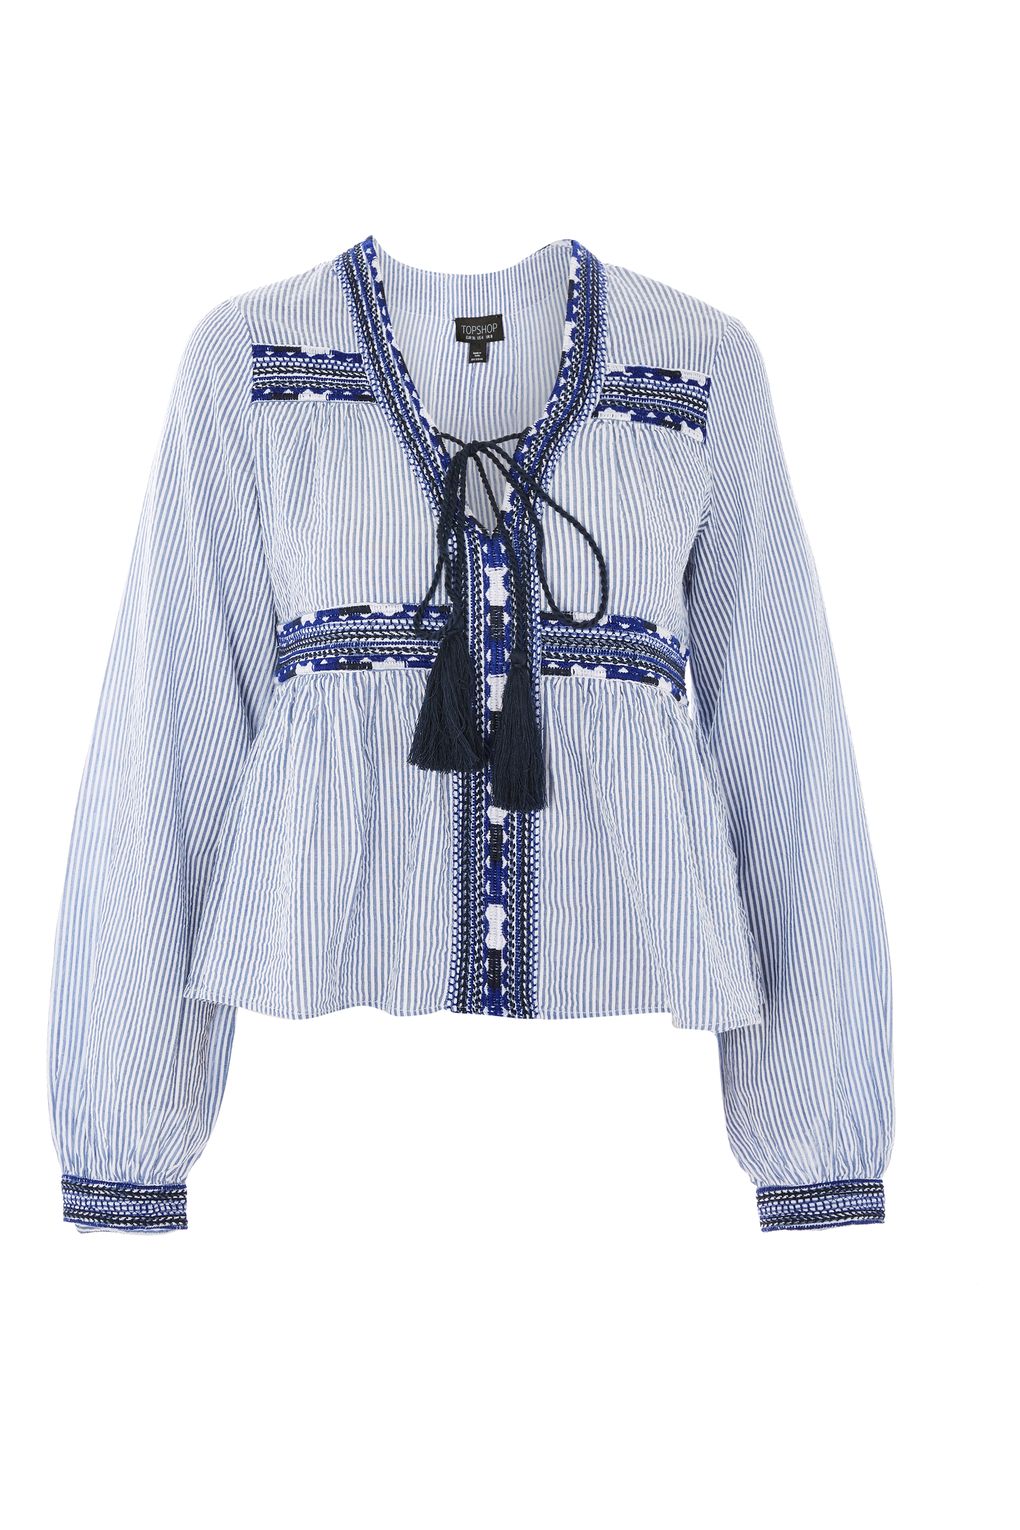 Topshop Strip Embroidered Smock Top